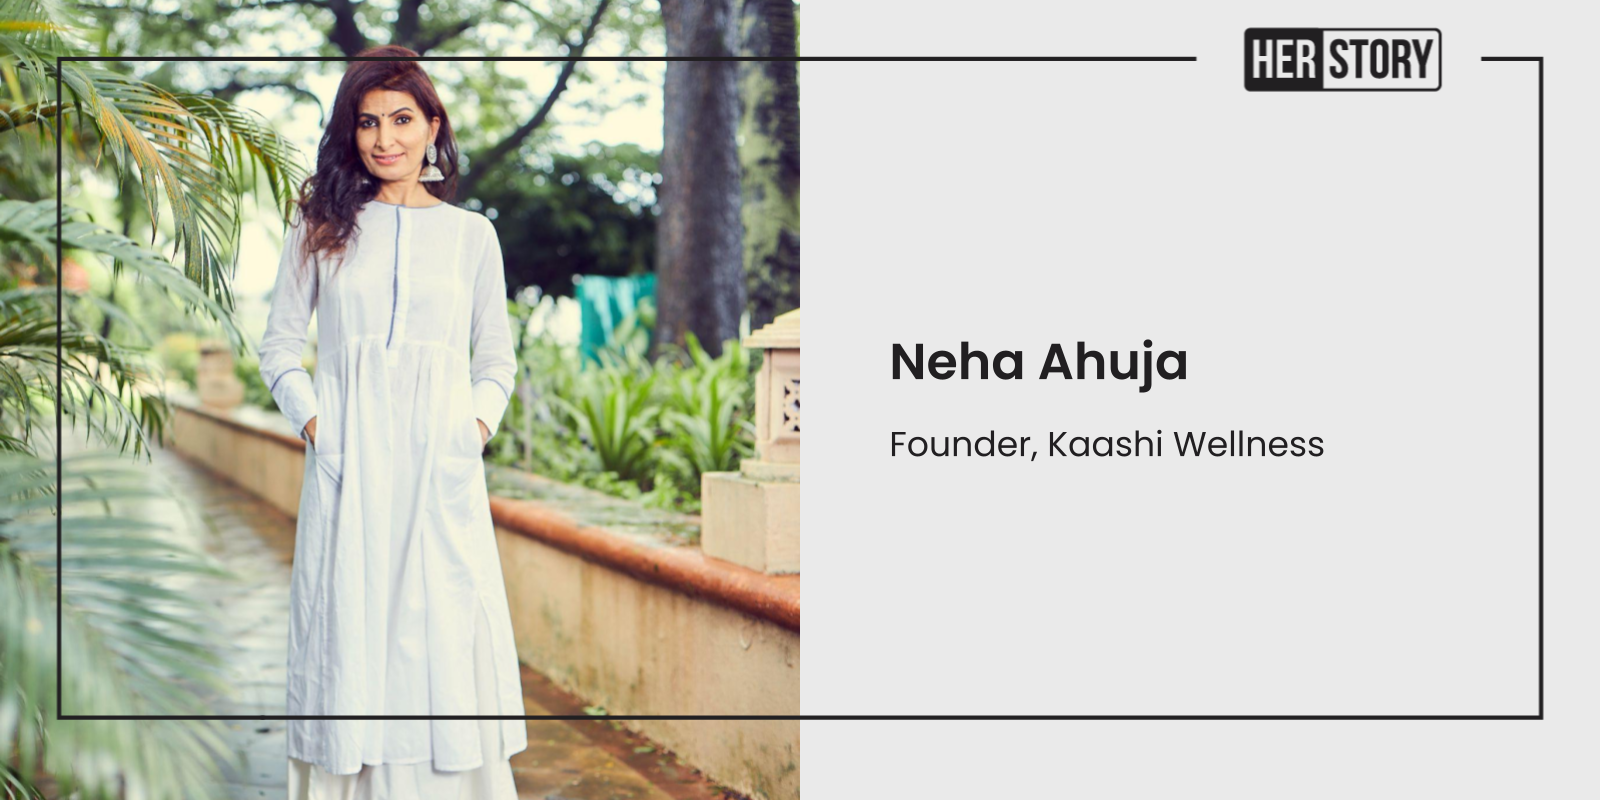 This woman entrepreneur tapped into India’s growing ecommerce market for her holistic wellness brand amid COVID-19
